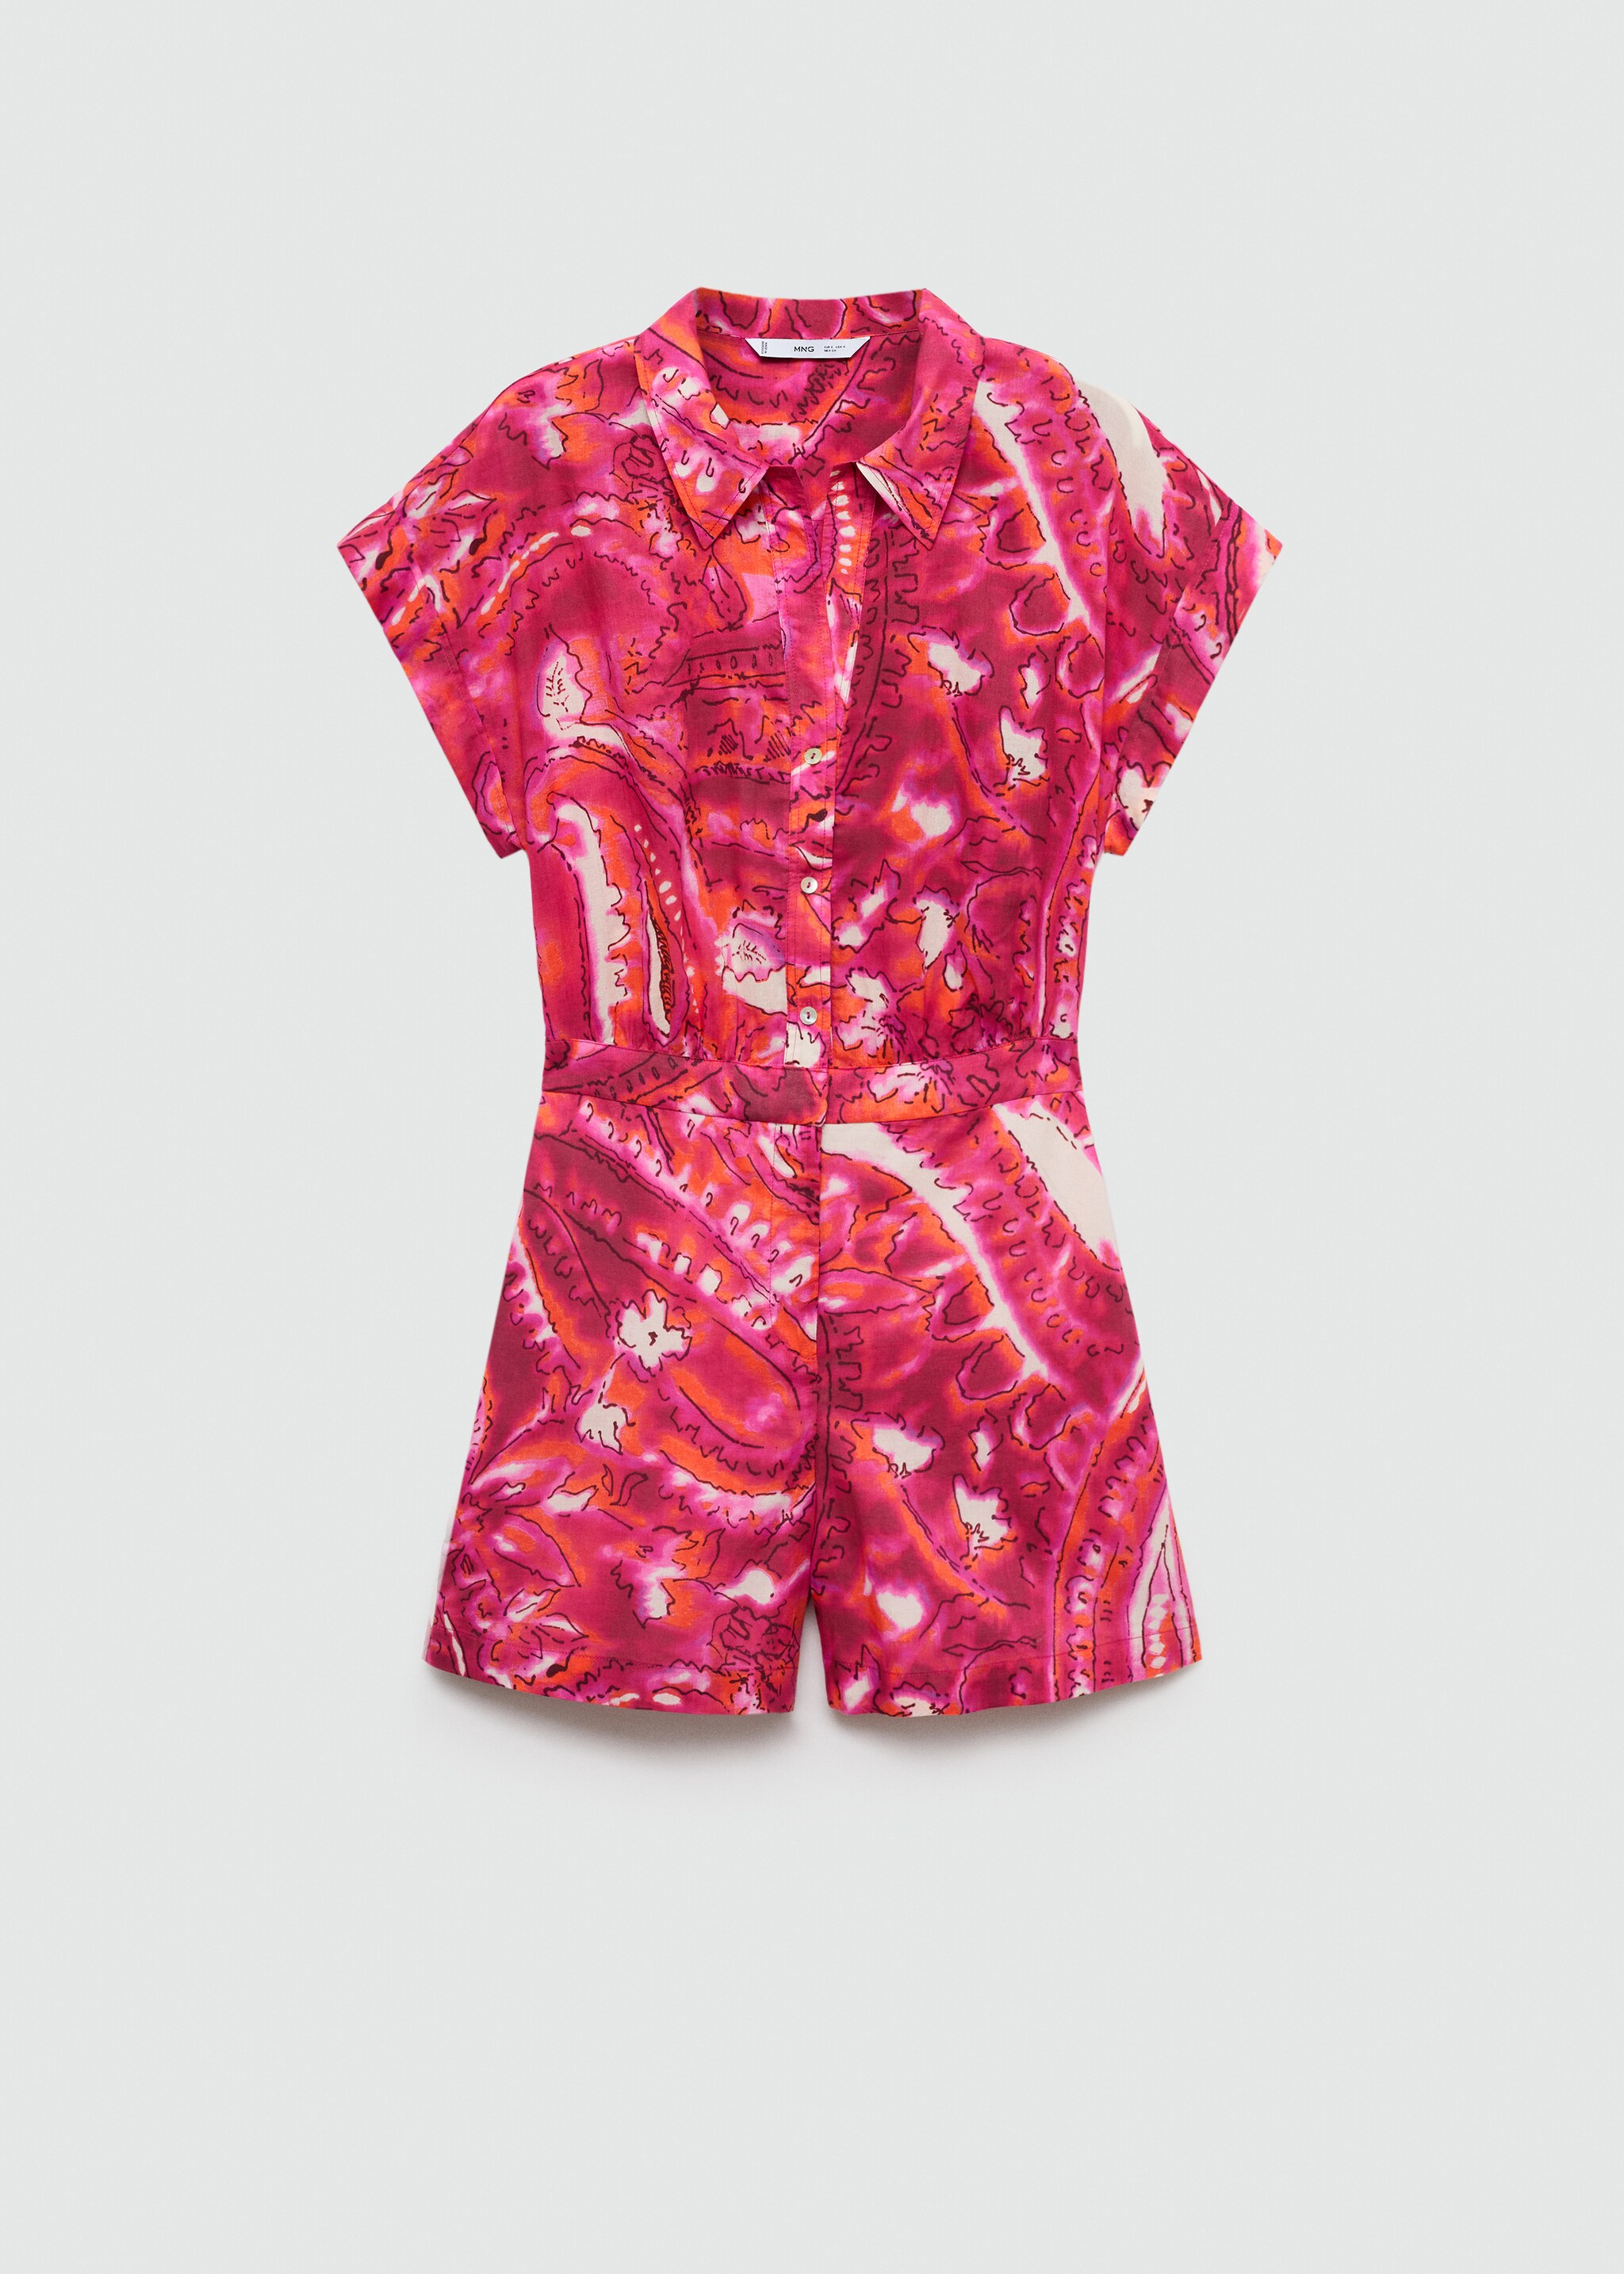 Printed shirt jumpsuit - Article without model